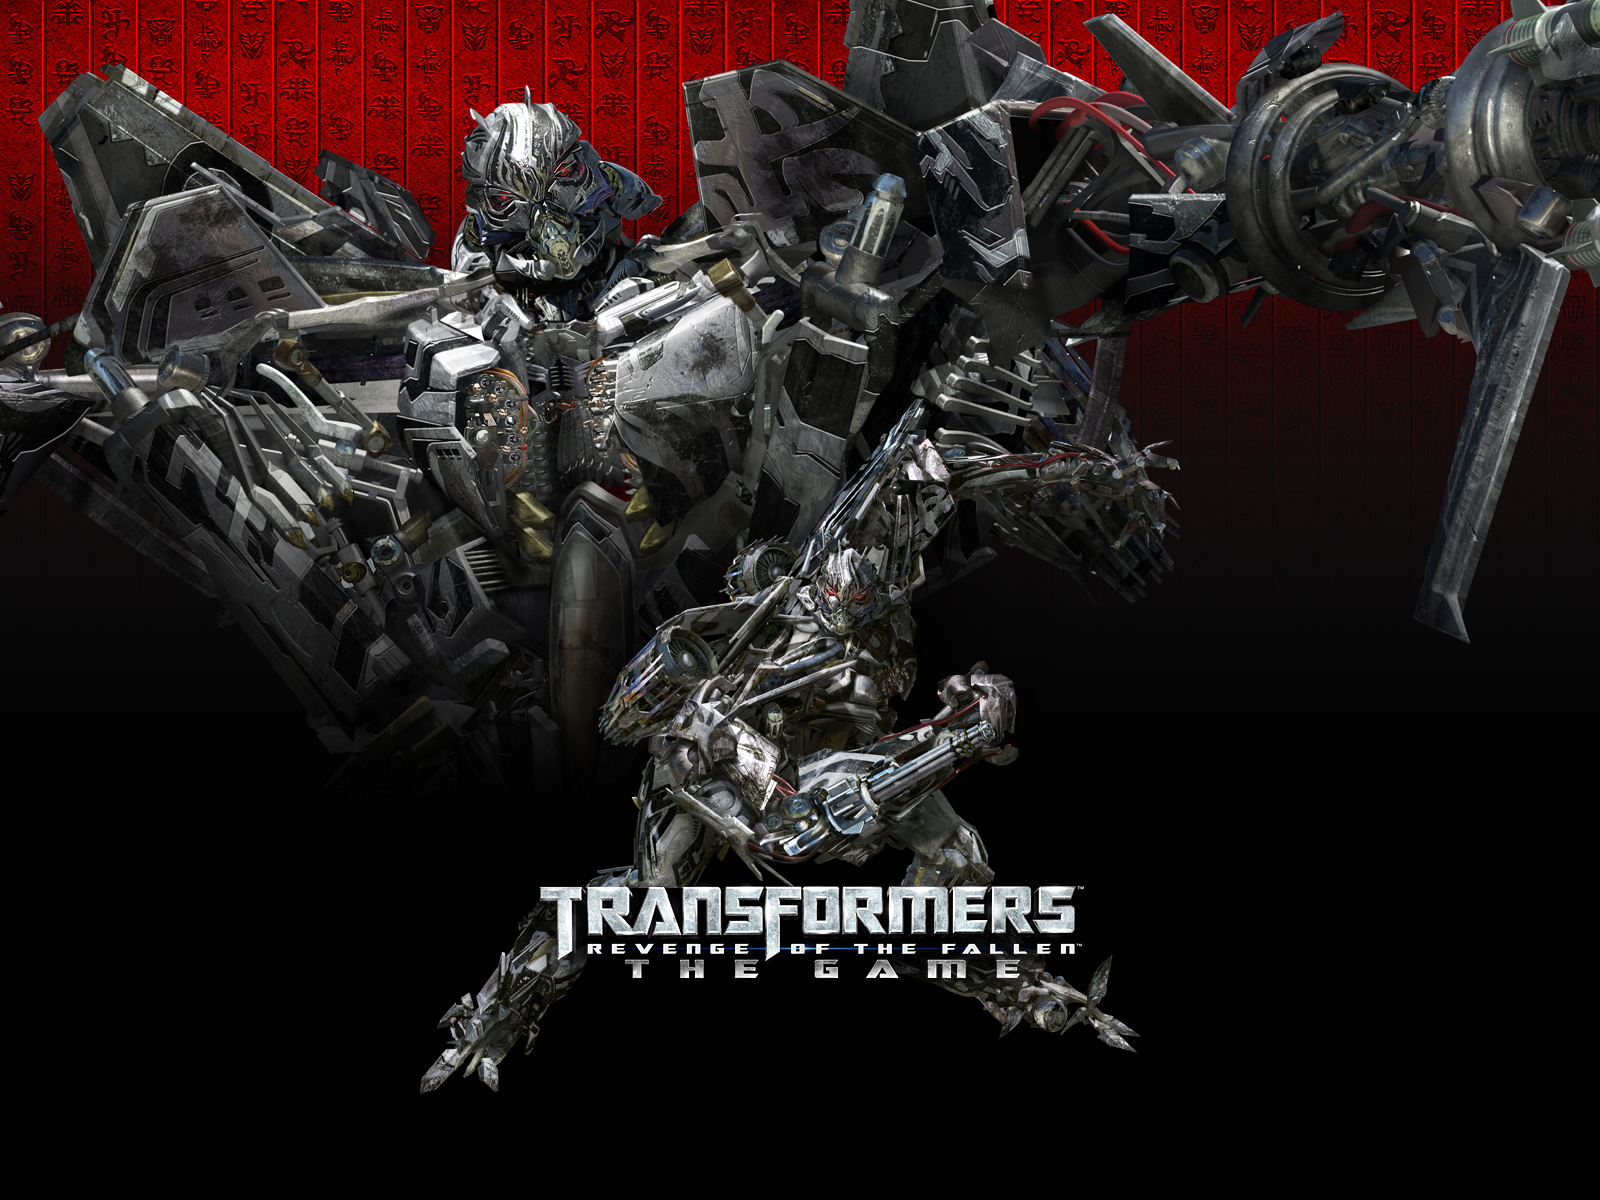 Download full size Transformers 2 Revenge Of The Fallen wallpaper / Movies / 1600x1200